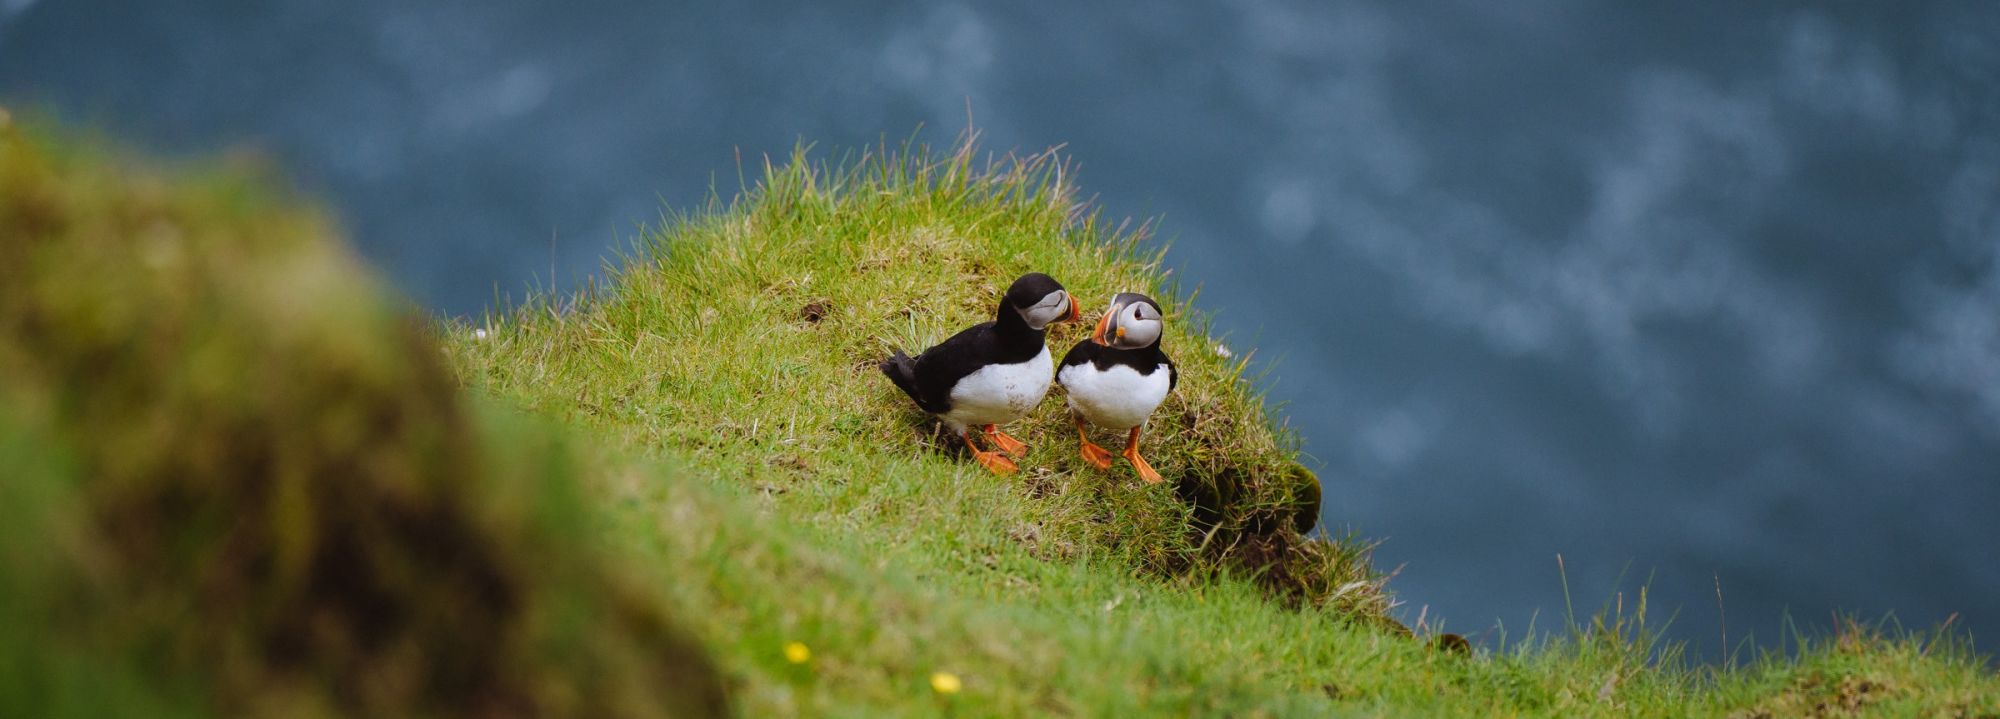 Two puffins by Nicola Cagol